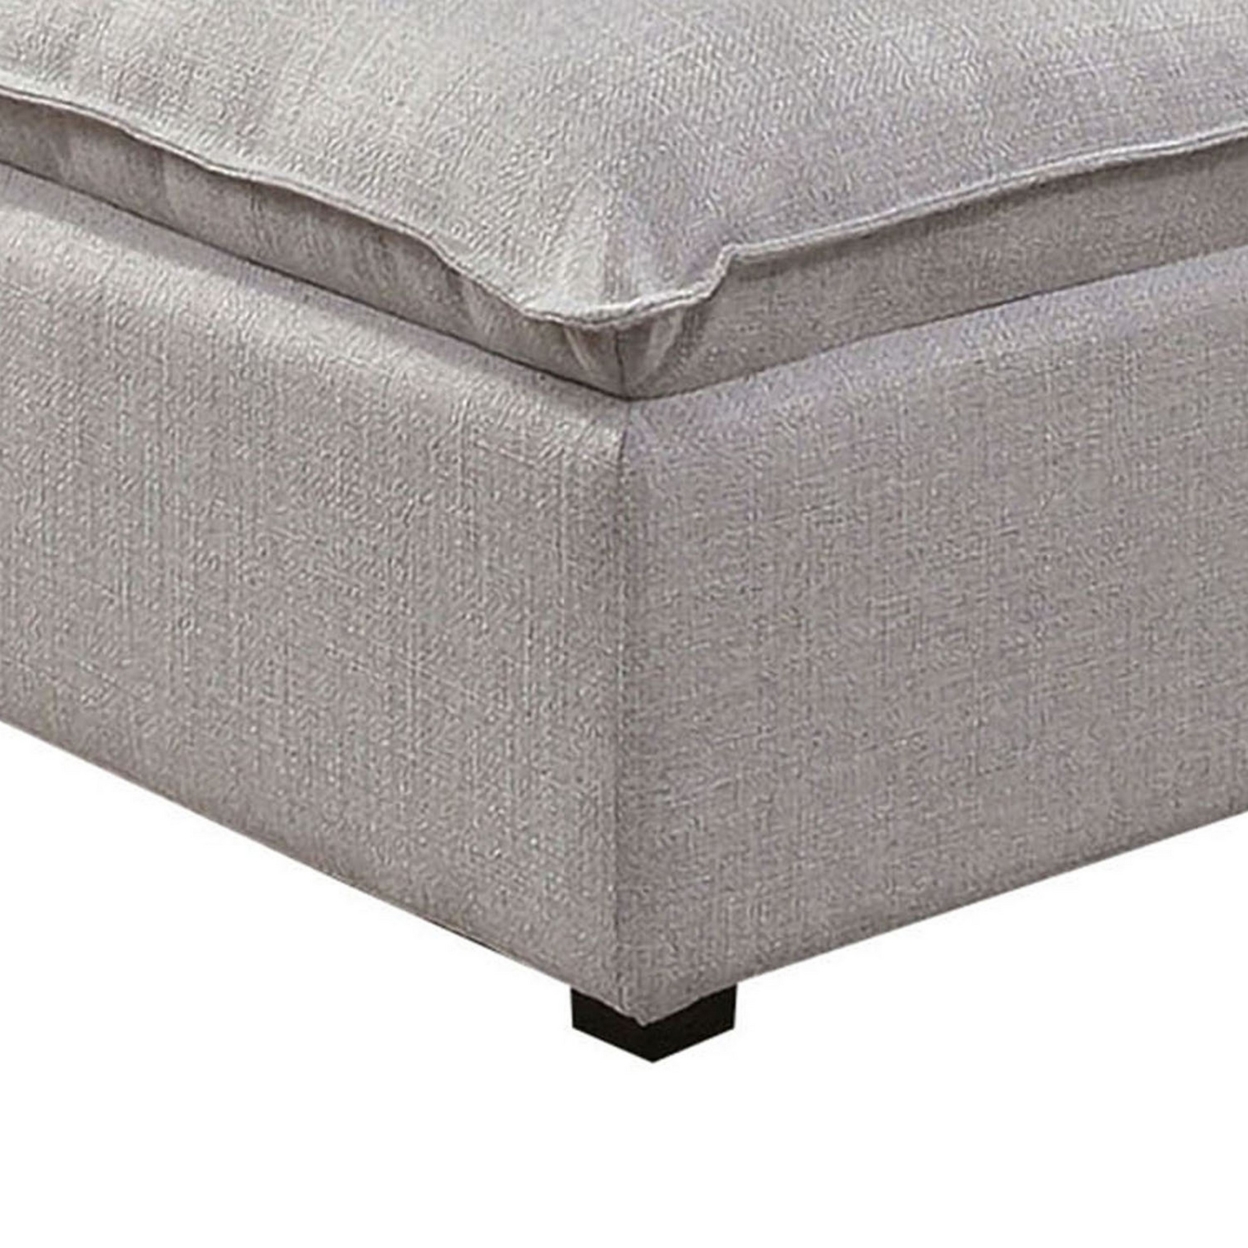 Fabric Upholstered Ottoman With Pillow Top Seat And Welt Trim, Gray- Saltoro Sherpi